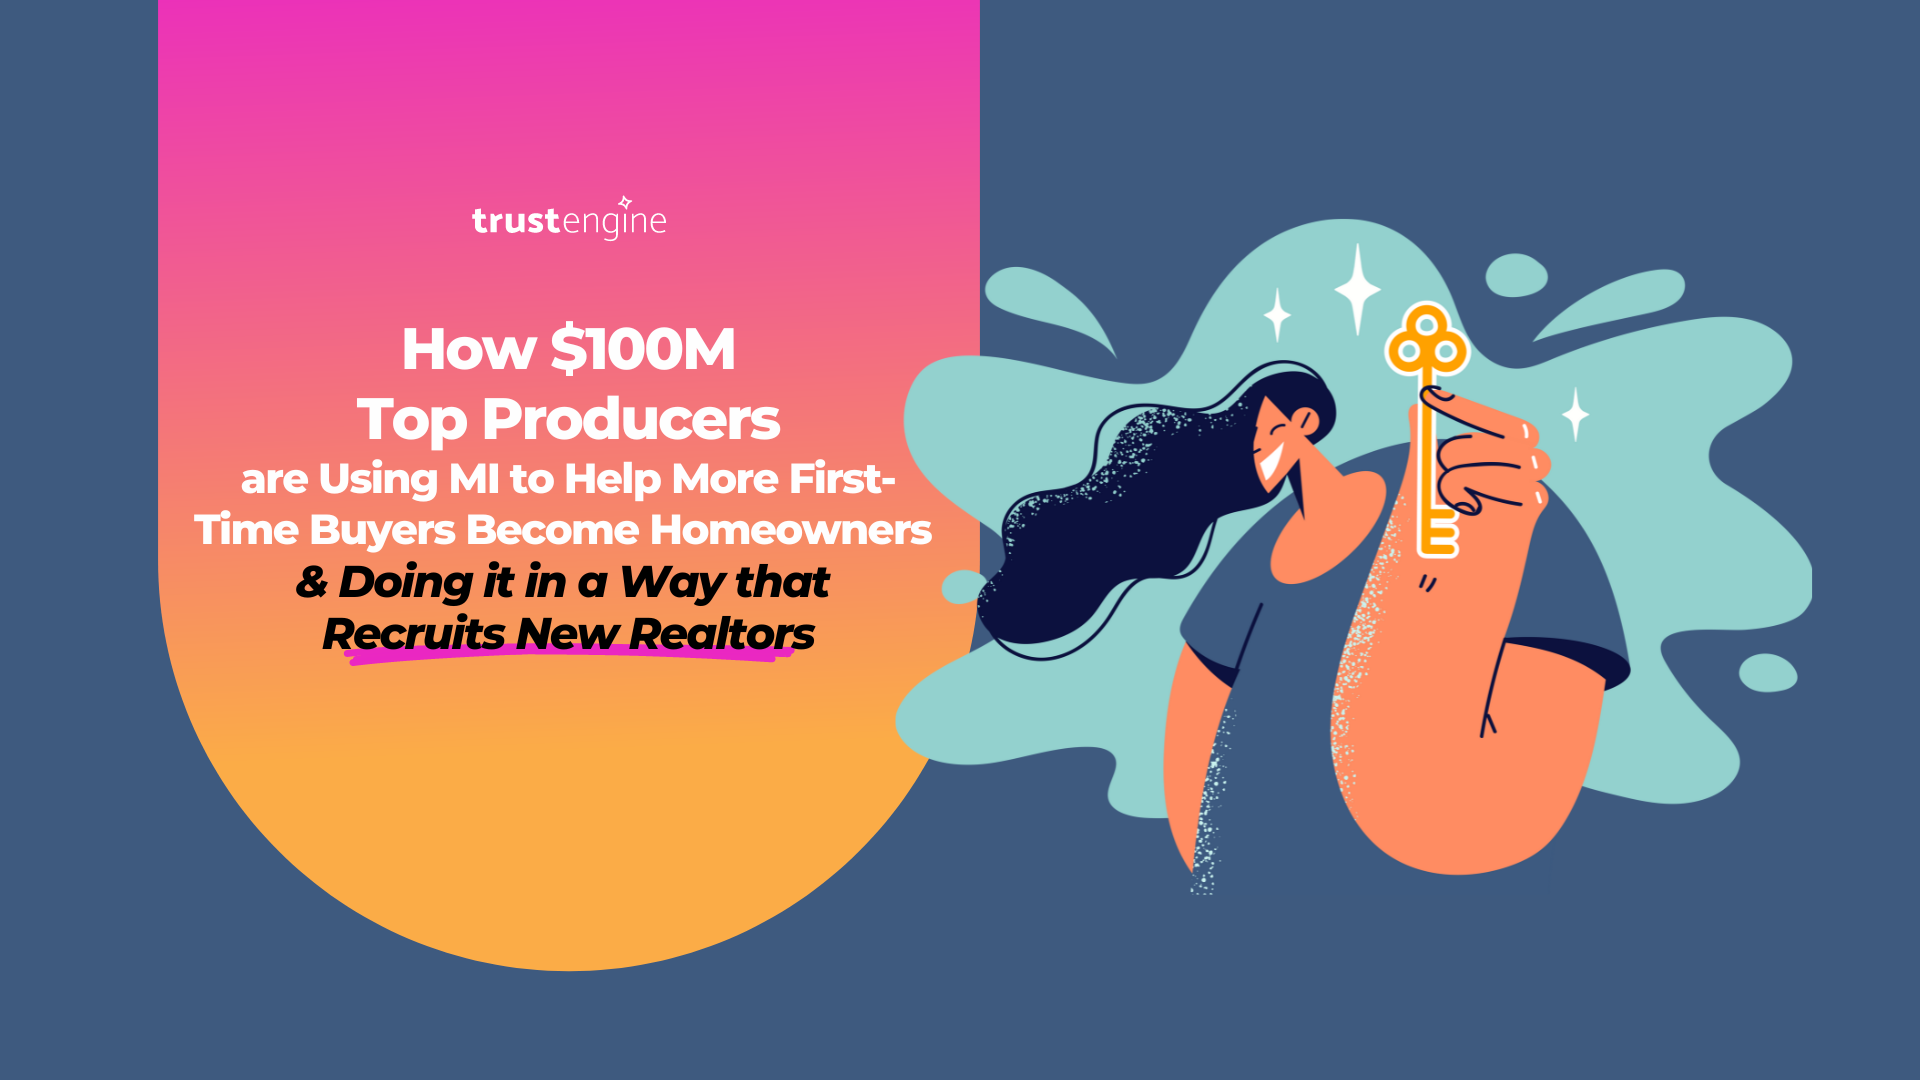 How $100M top producers are using MI to help more first-time buyers become homeowners and doing it in a way that recruits new Realtors